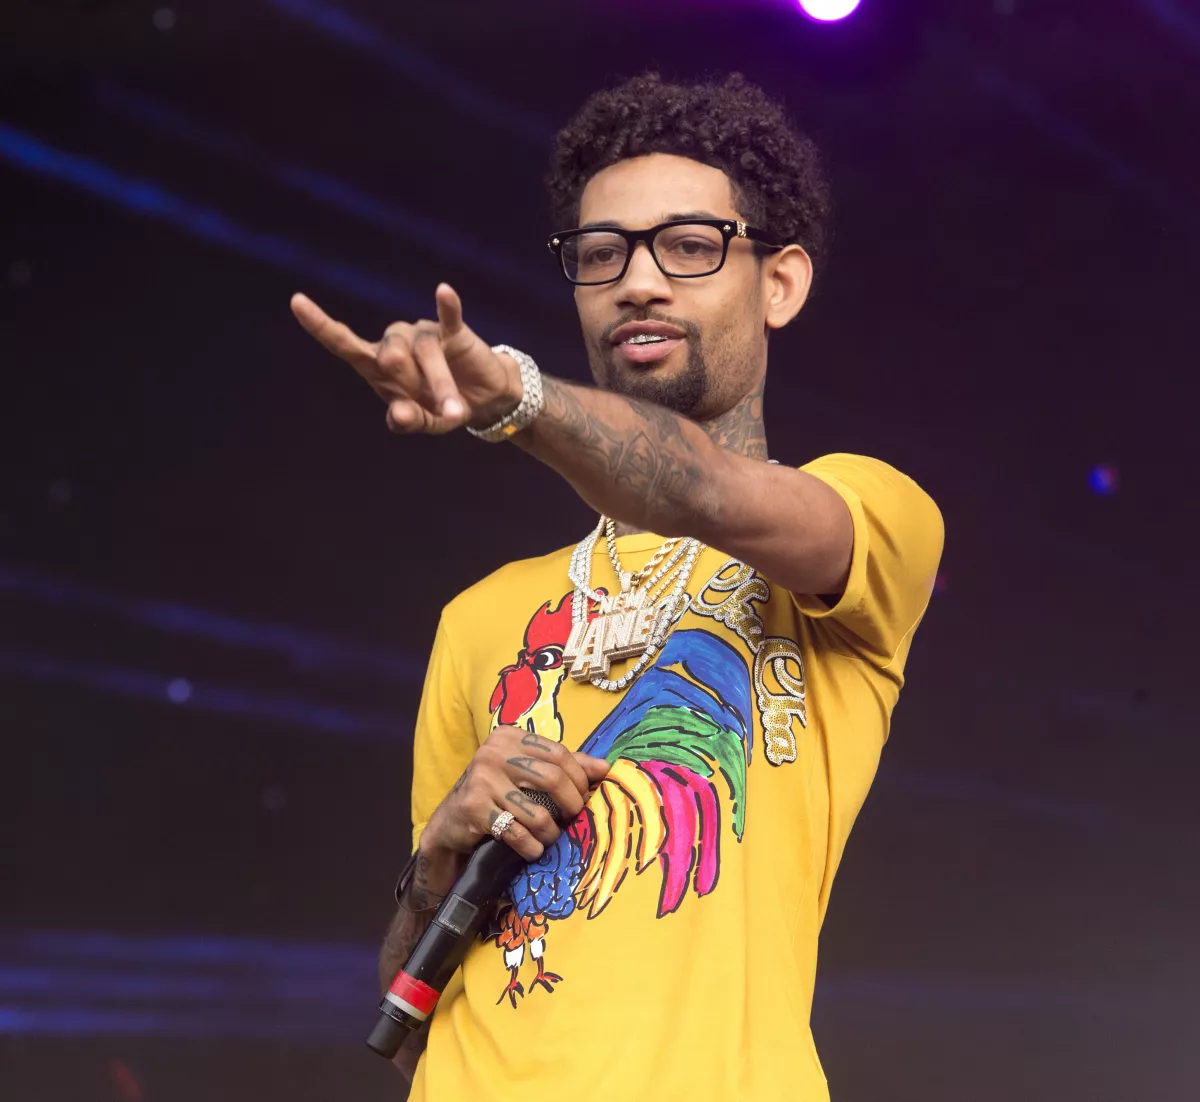 Watch video on aftermath of the shooting of Rapper PnB Rock at Roscoe’s